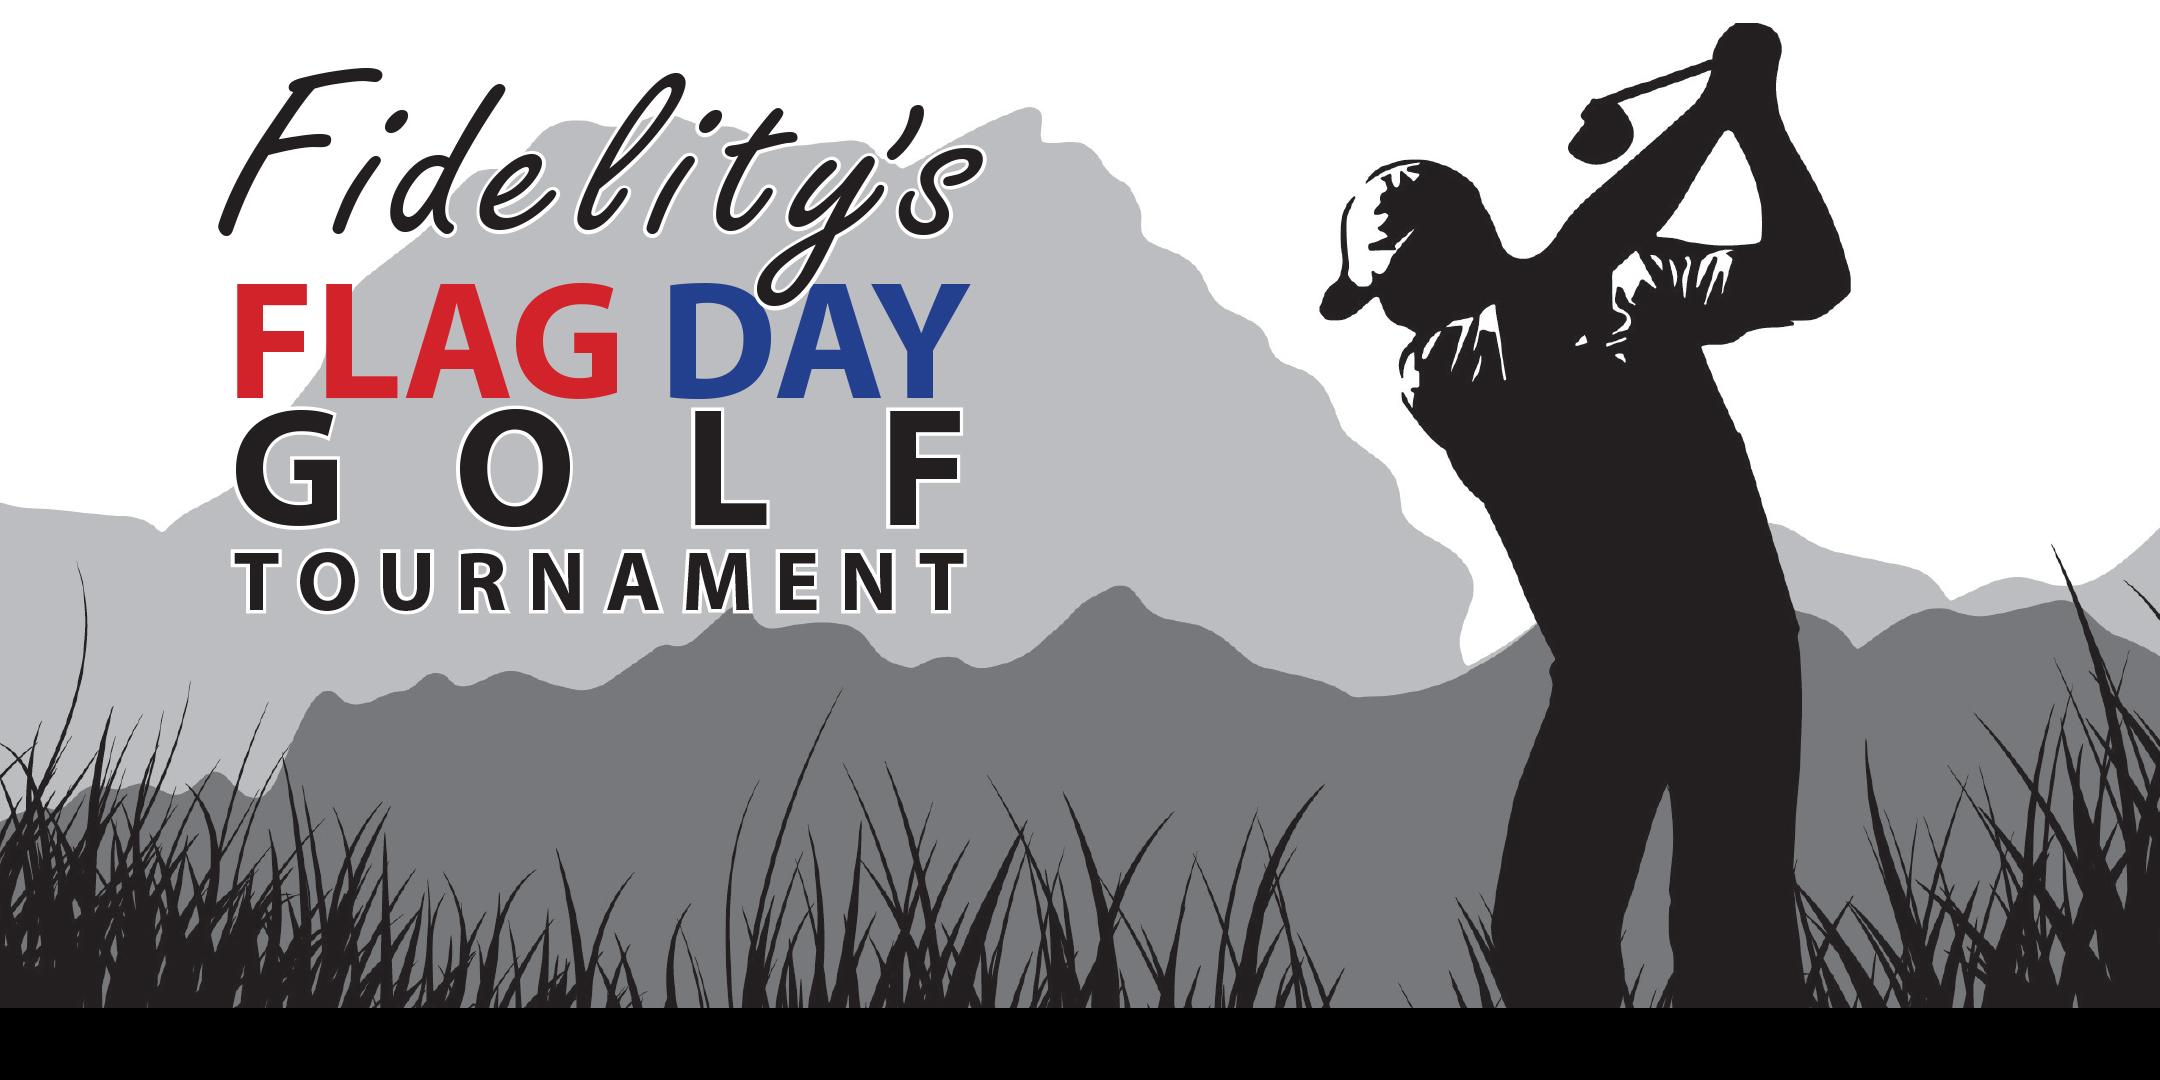 2nd Annual Fidelity Flag Day Golf Tournament